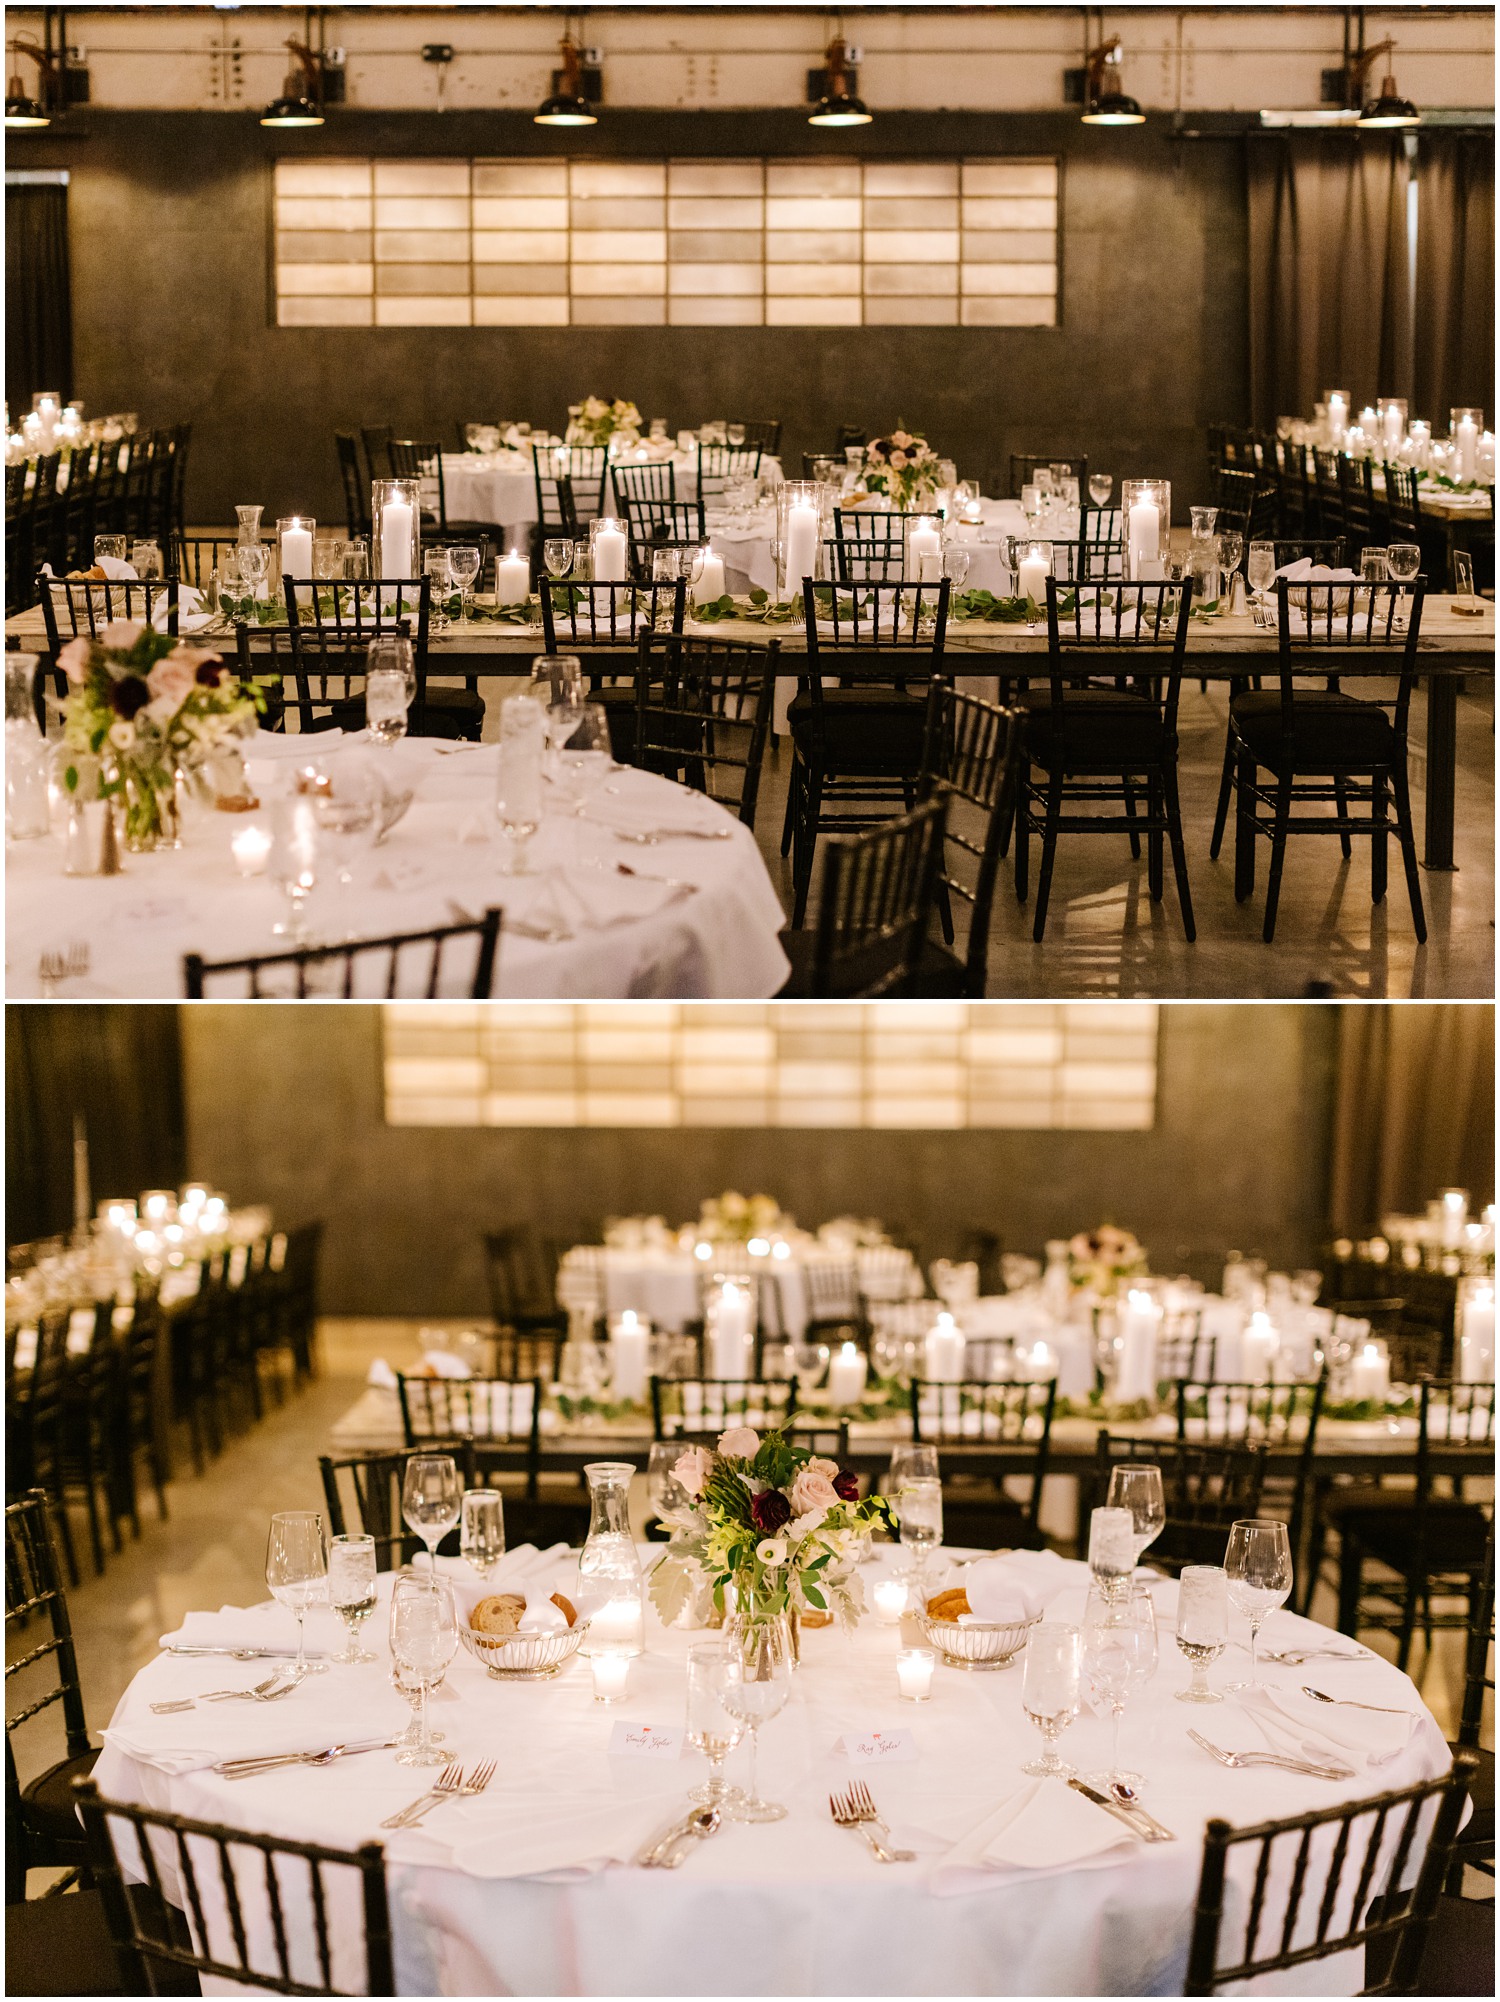 Cadillac Service Garage wedding reception details photographed by Chelsea Renay Photography